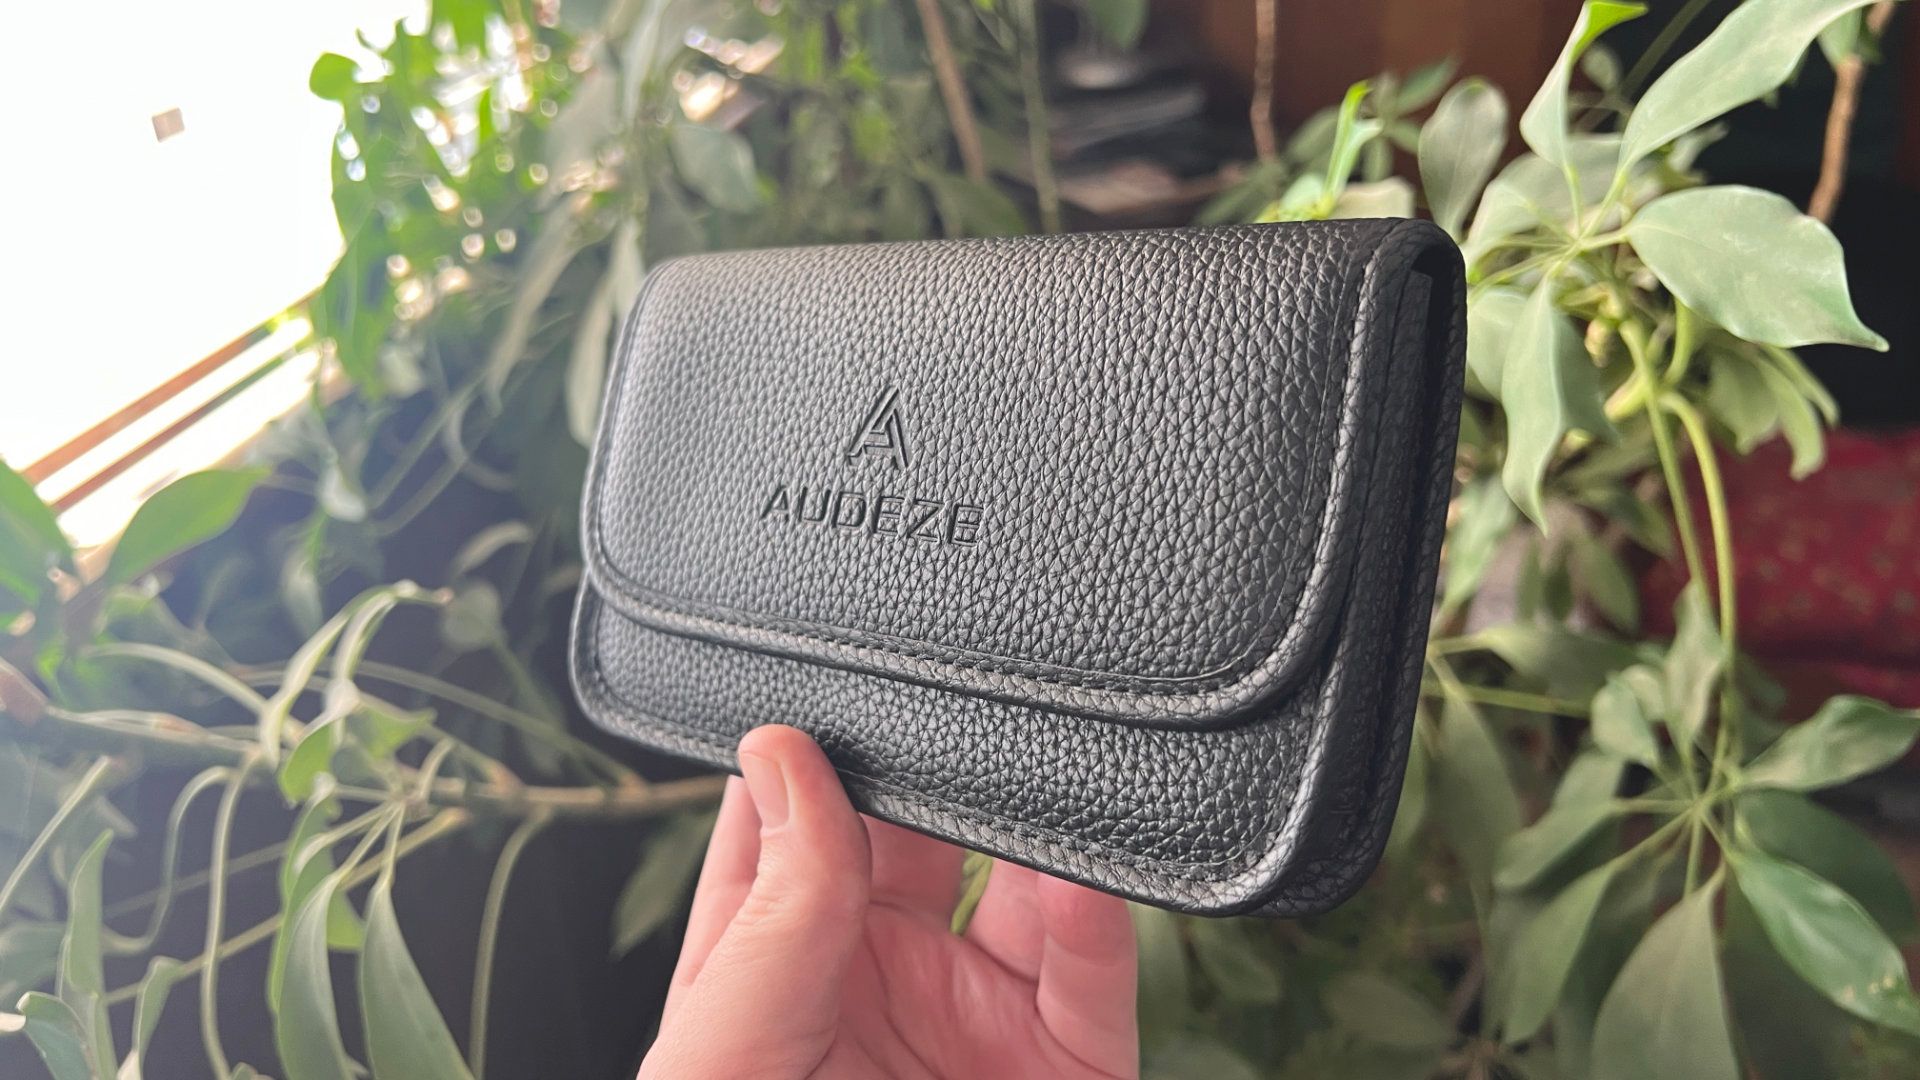 Person holding the Audeze Filter case